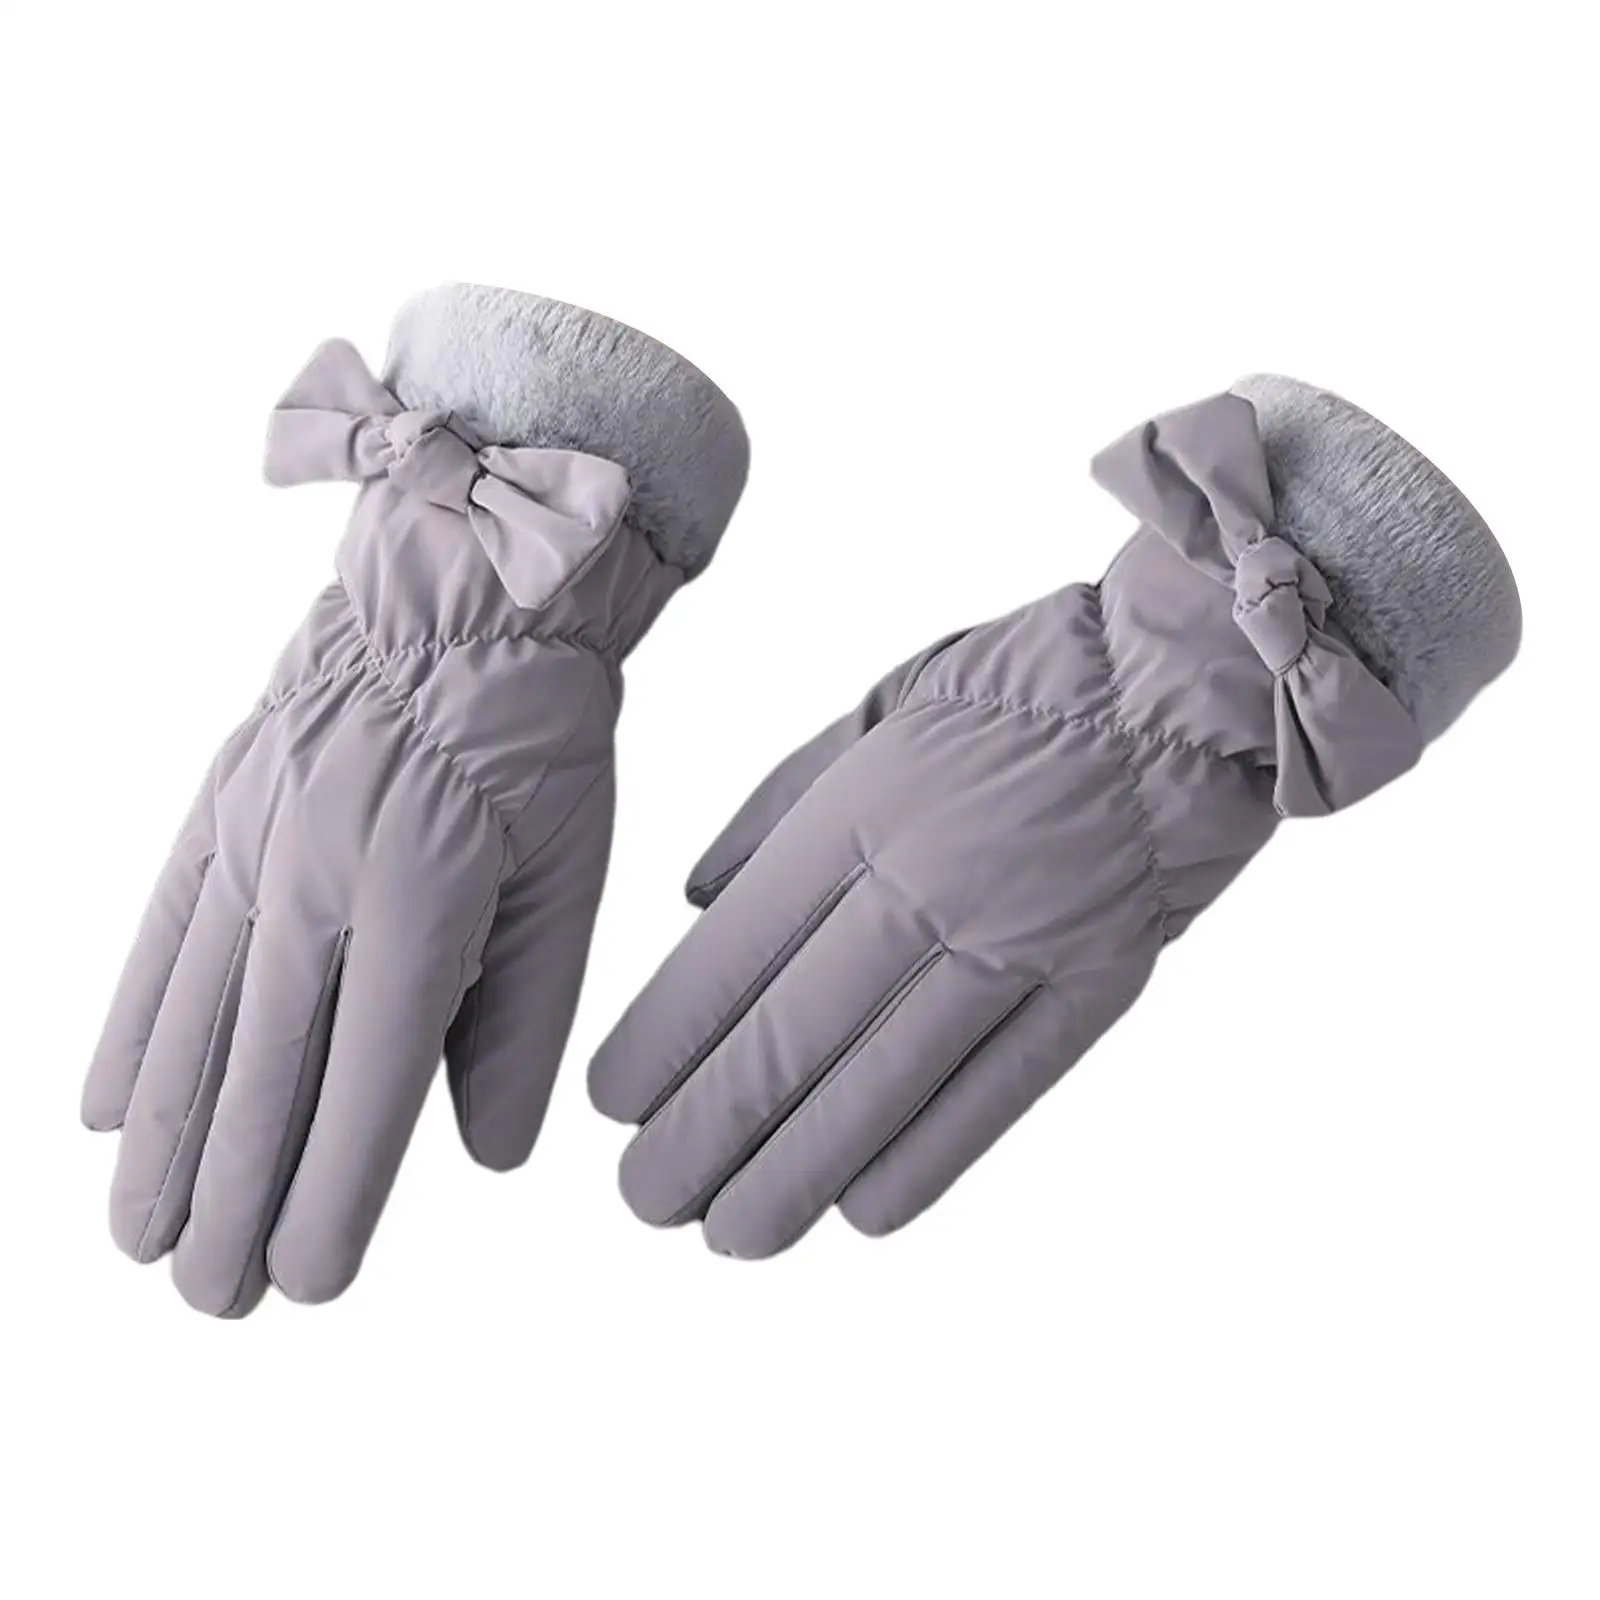 Women Winter Gloves Touch Screen Thermal Gloves Full Finger Warm Texting Gloves for Skiing Outdoor Sports Cycling Hiking